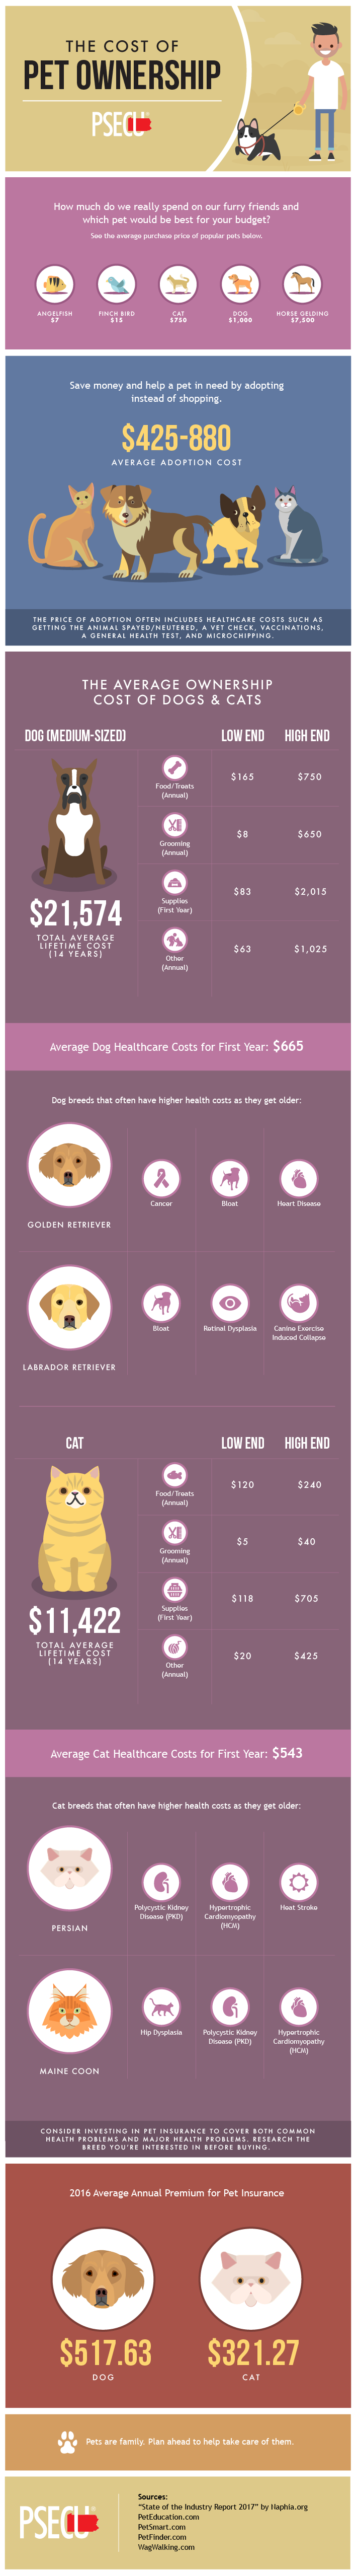 Cost of Pet Ownership - How much does it cost to own a dog or cat